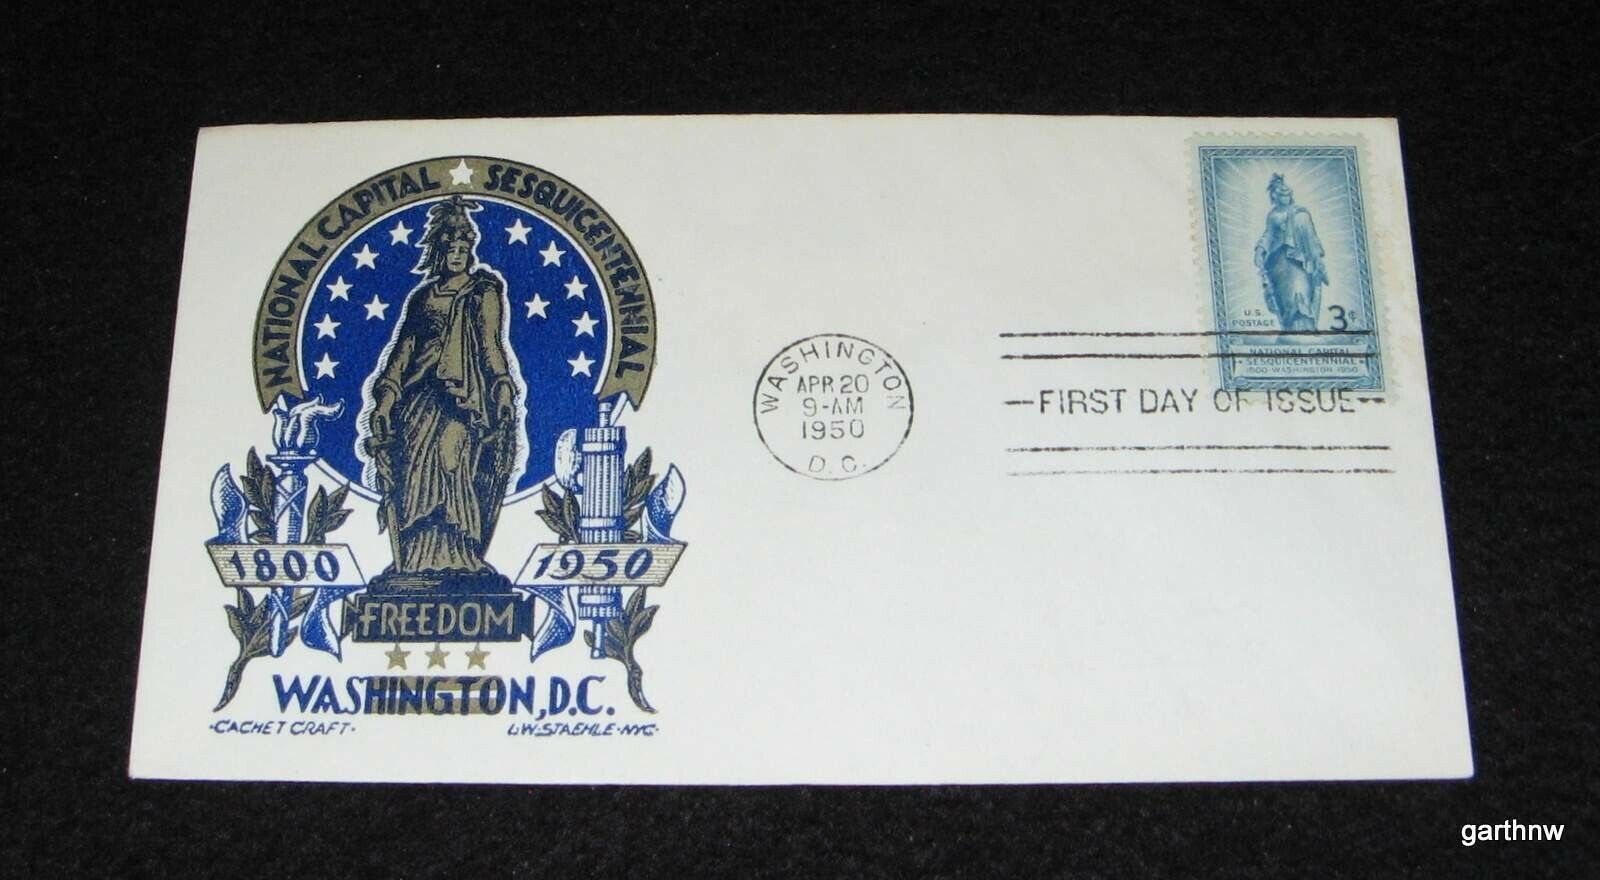 NATIONAL CAPITAL 1950 FREEDOM STATUE FIRST DAY COVER 150th WASHINGTON DC